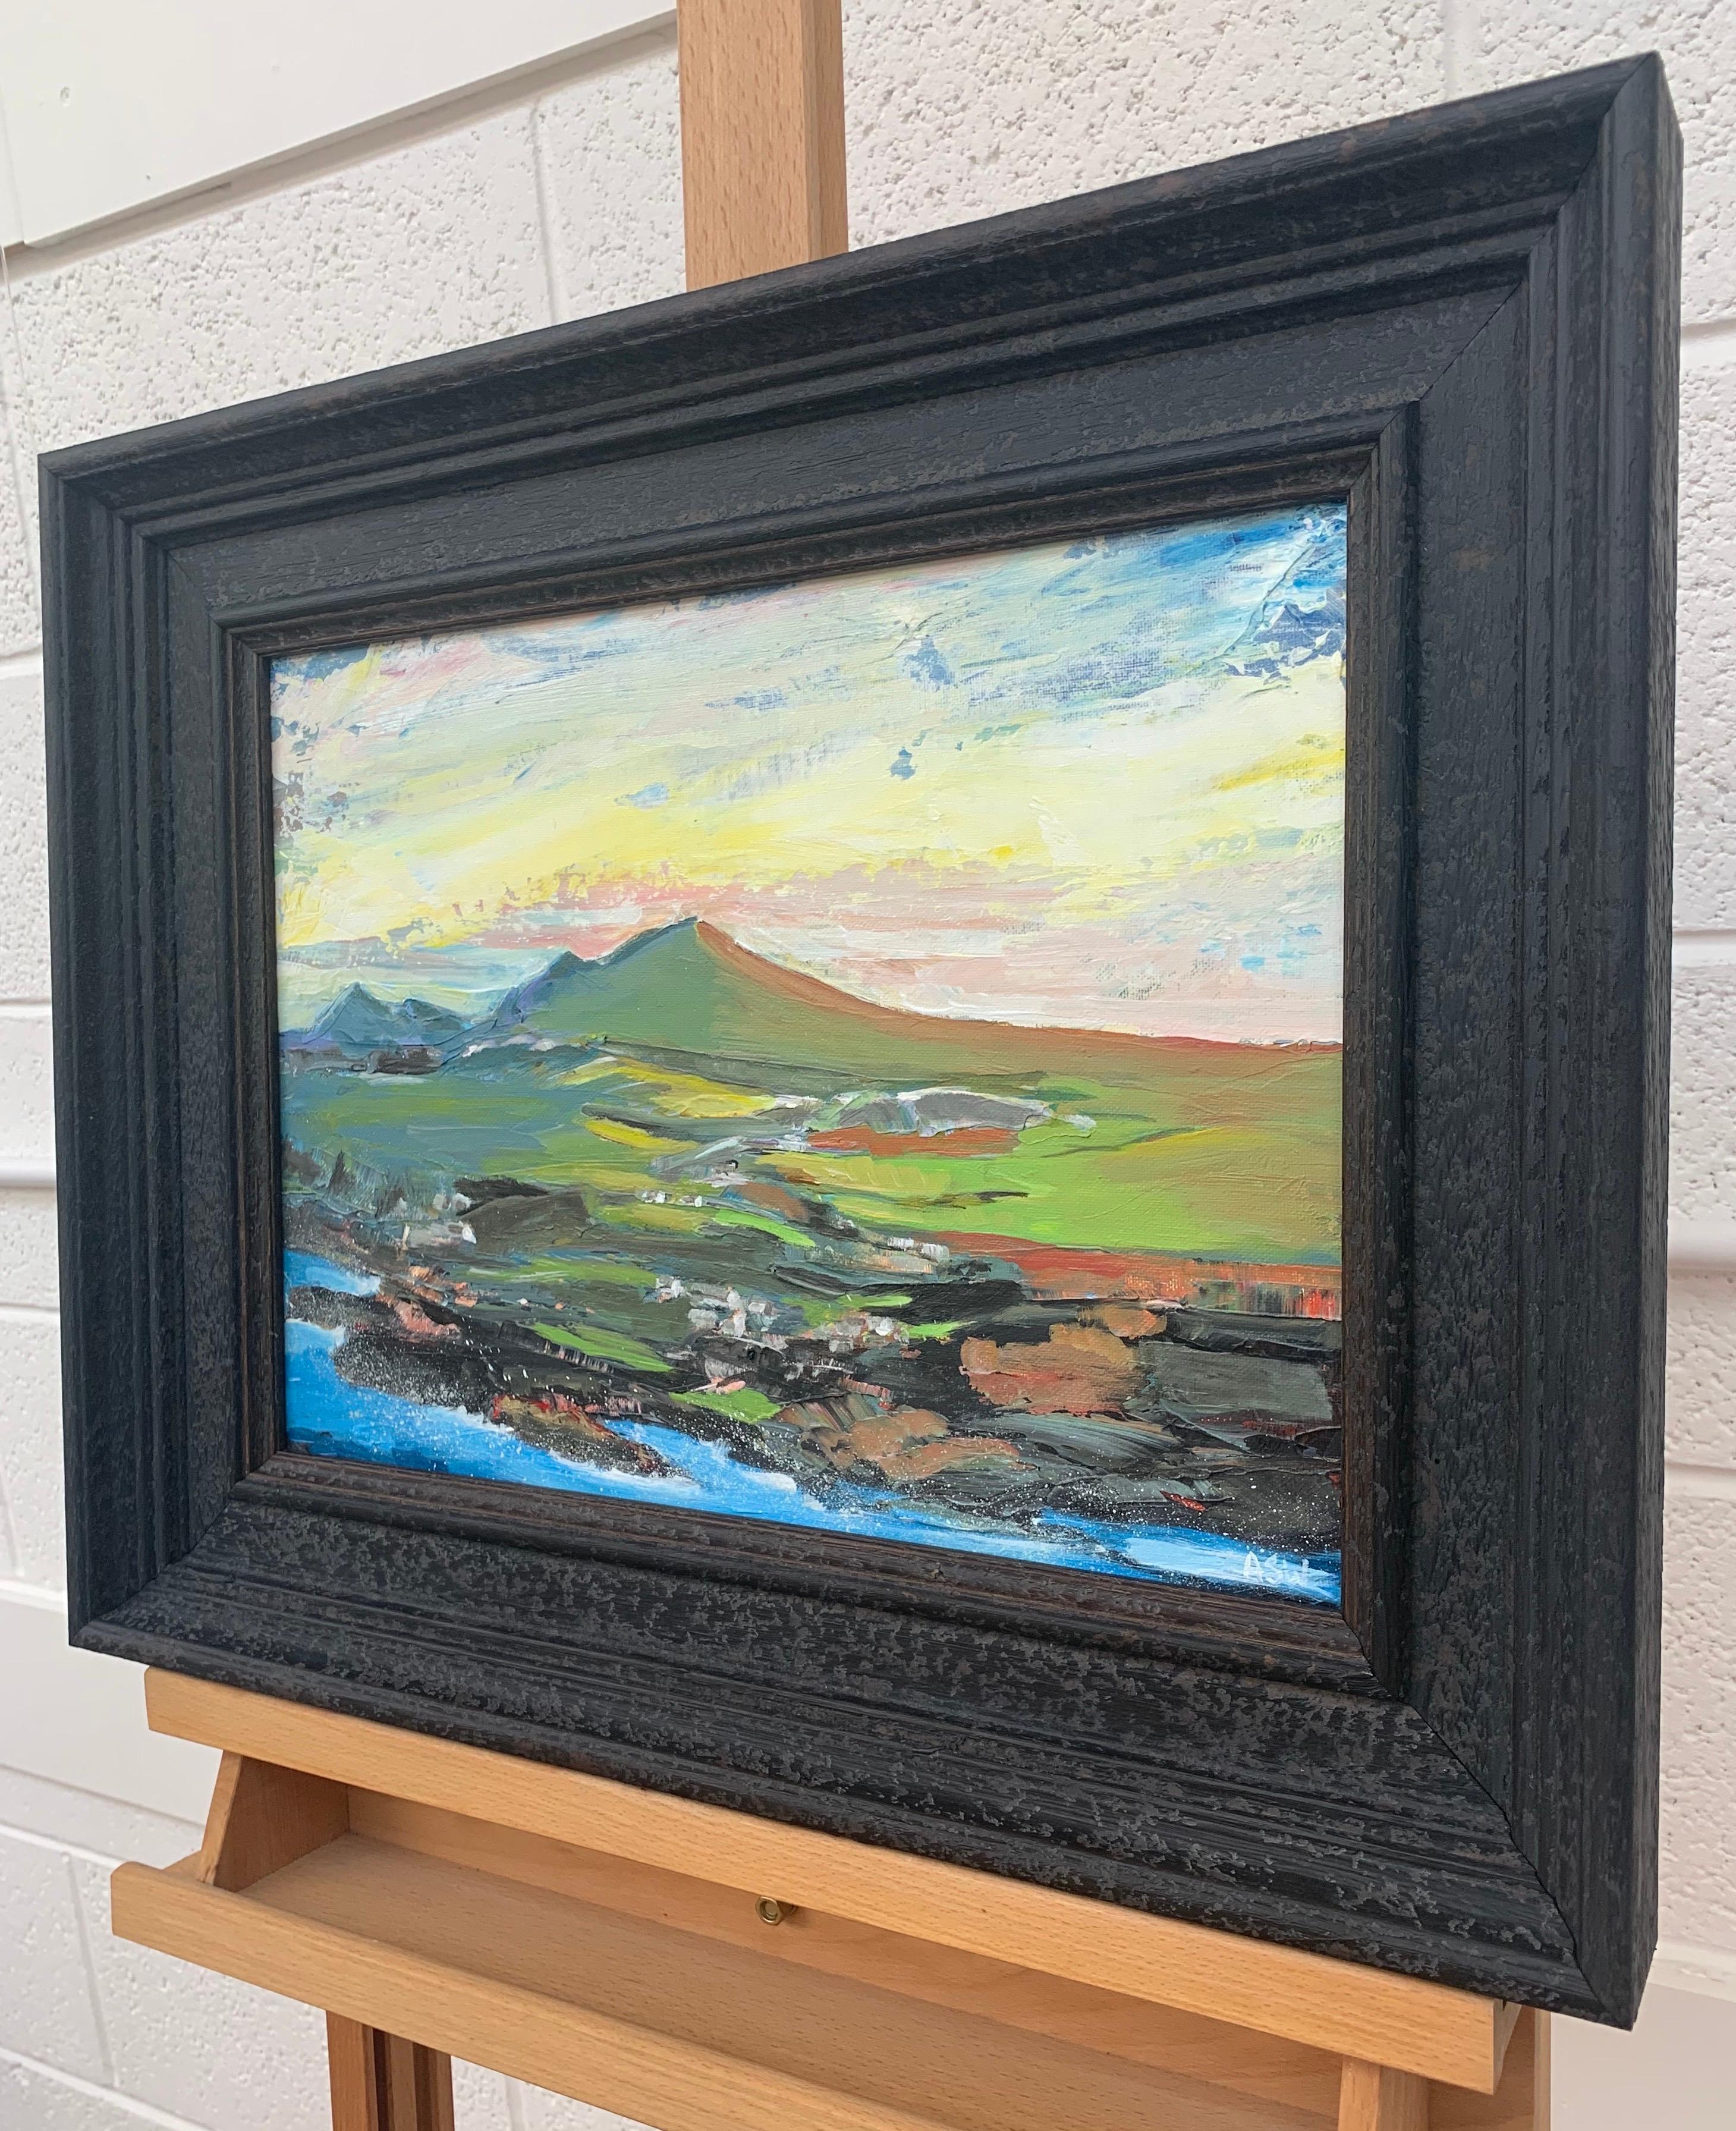 Original Abstract Landscape Painting of the Scottish Highlands by British Artist, Angela Wakefield

Art measures 16 x 12 inches
Frame measures 21 x 17 inches 

Angela Wakefield has twice been on the front cover of ‘Art of England’ and featured in